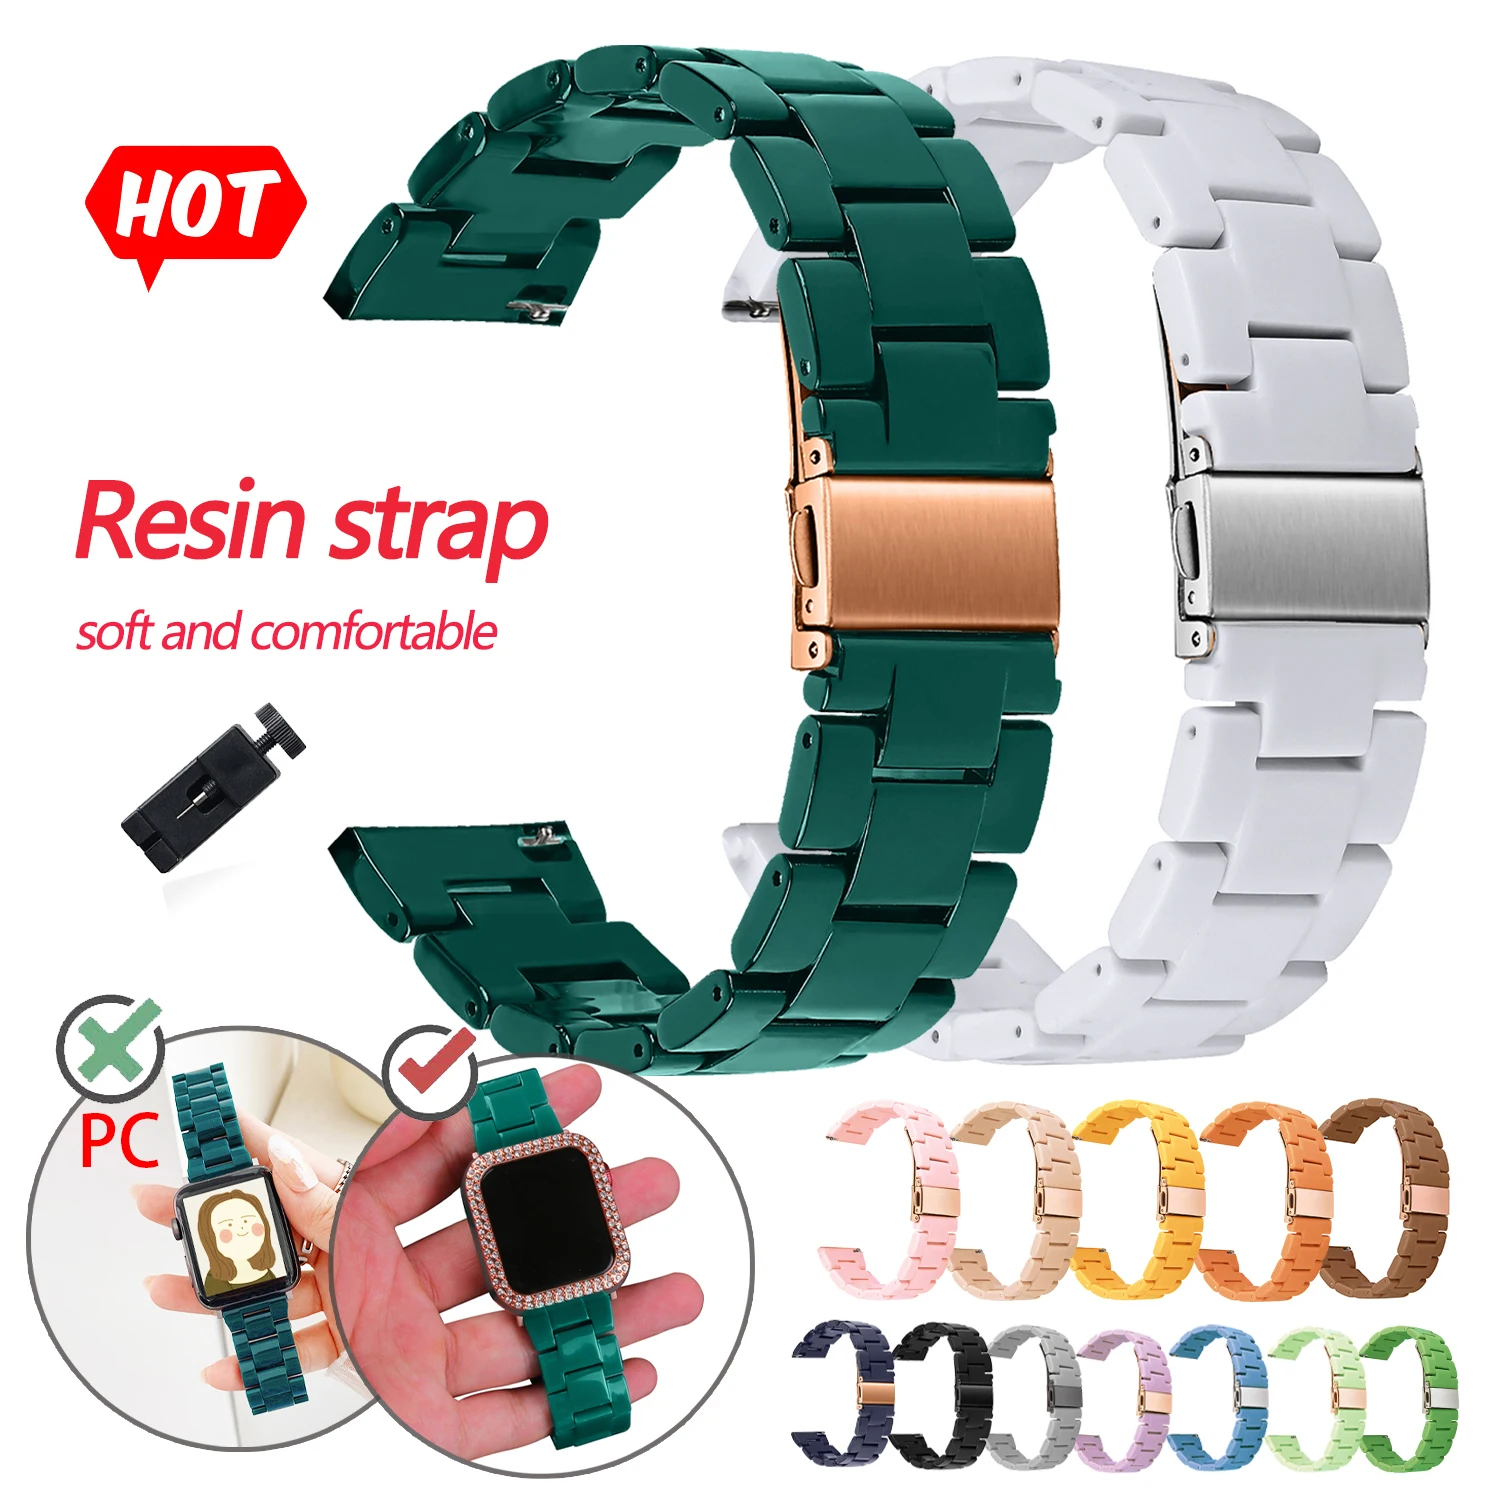 

22mm Resin Bracelet Watch Band for Samsung Galaxy Watch 3 46mm Gear S3 Strap for Huawei Watch 3 Pro GT2/GT3 46mm Quick Release